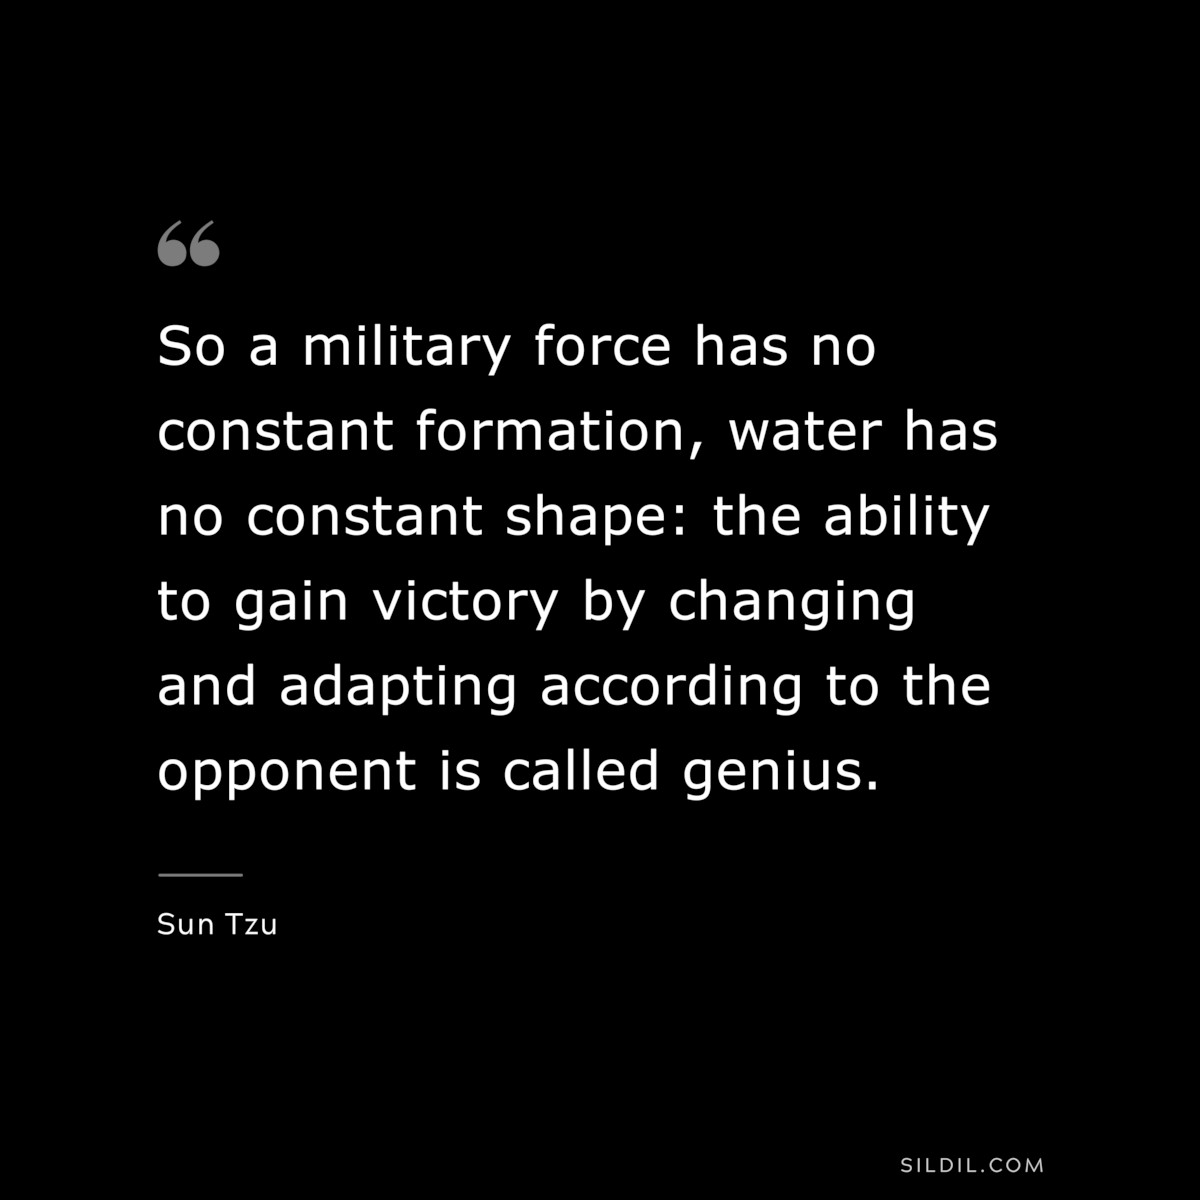 So a military force has no constant formation, water has no constant shape: the ability to gain victory by changing and adapting according to the opponent is called genius.― Sun Tzu